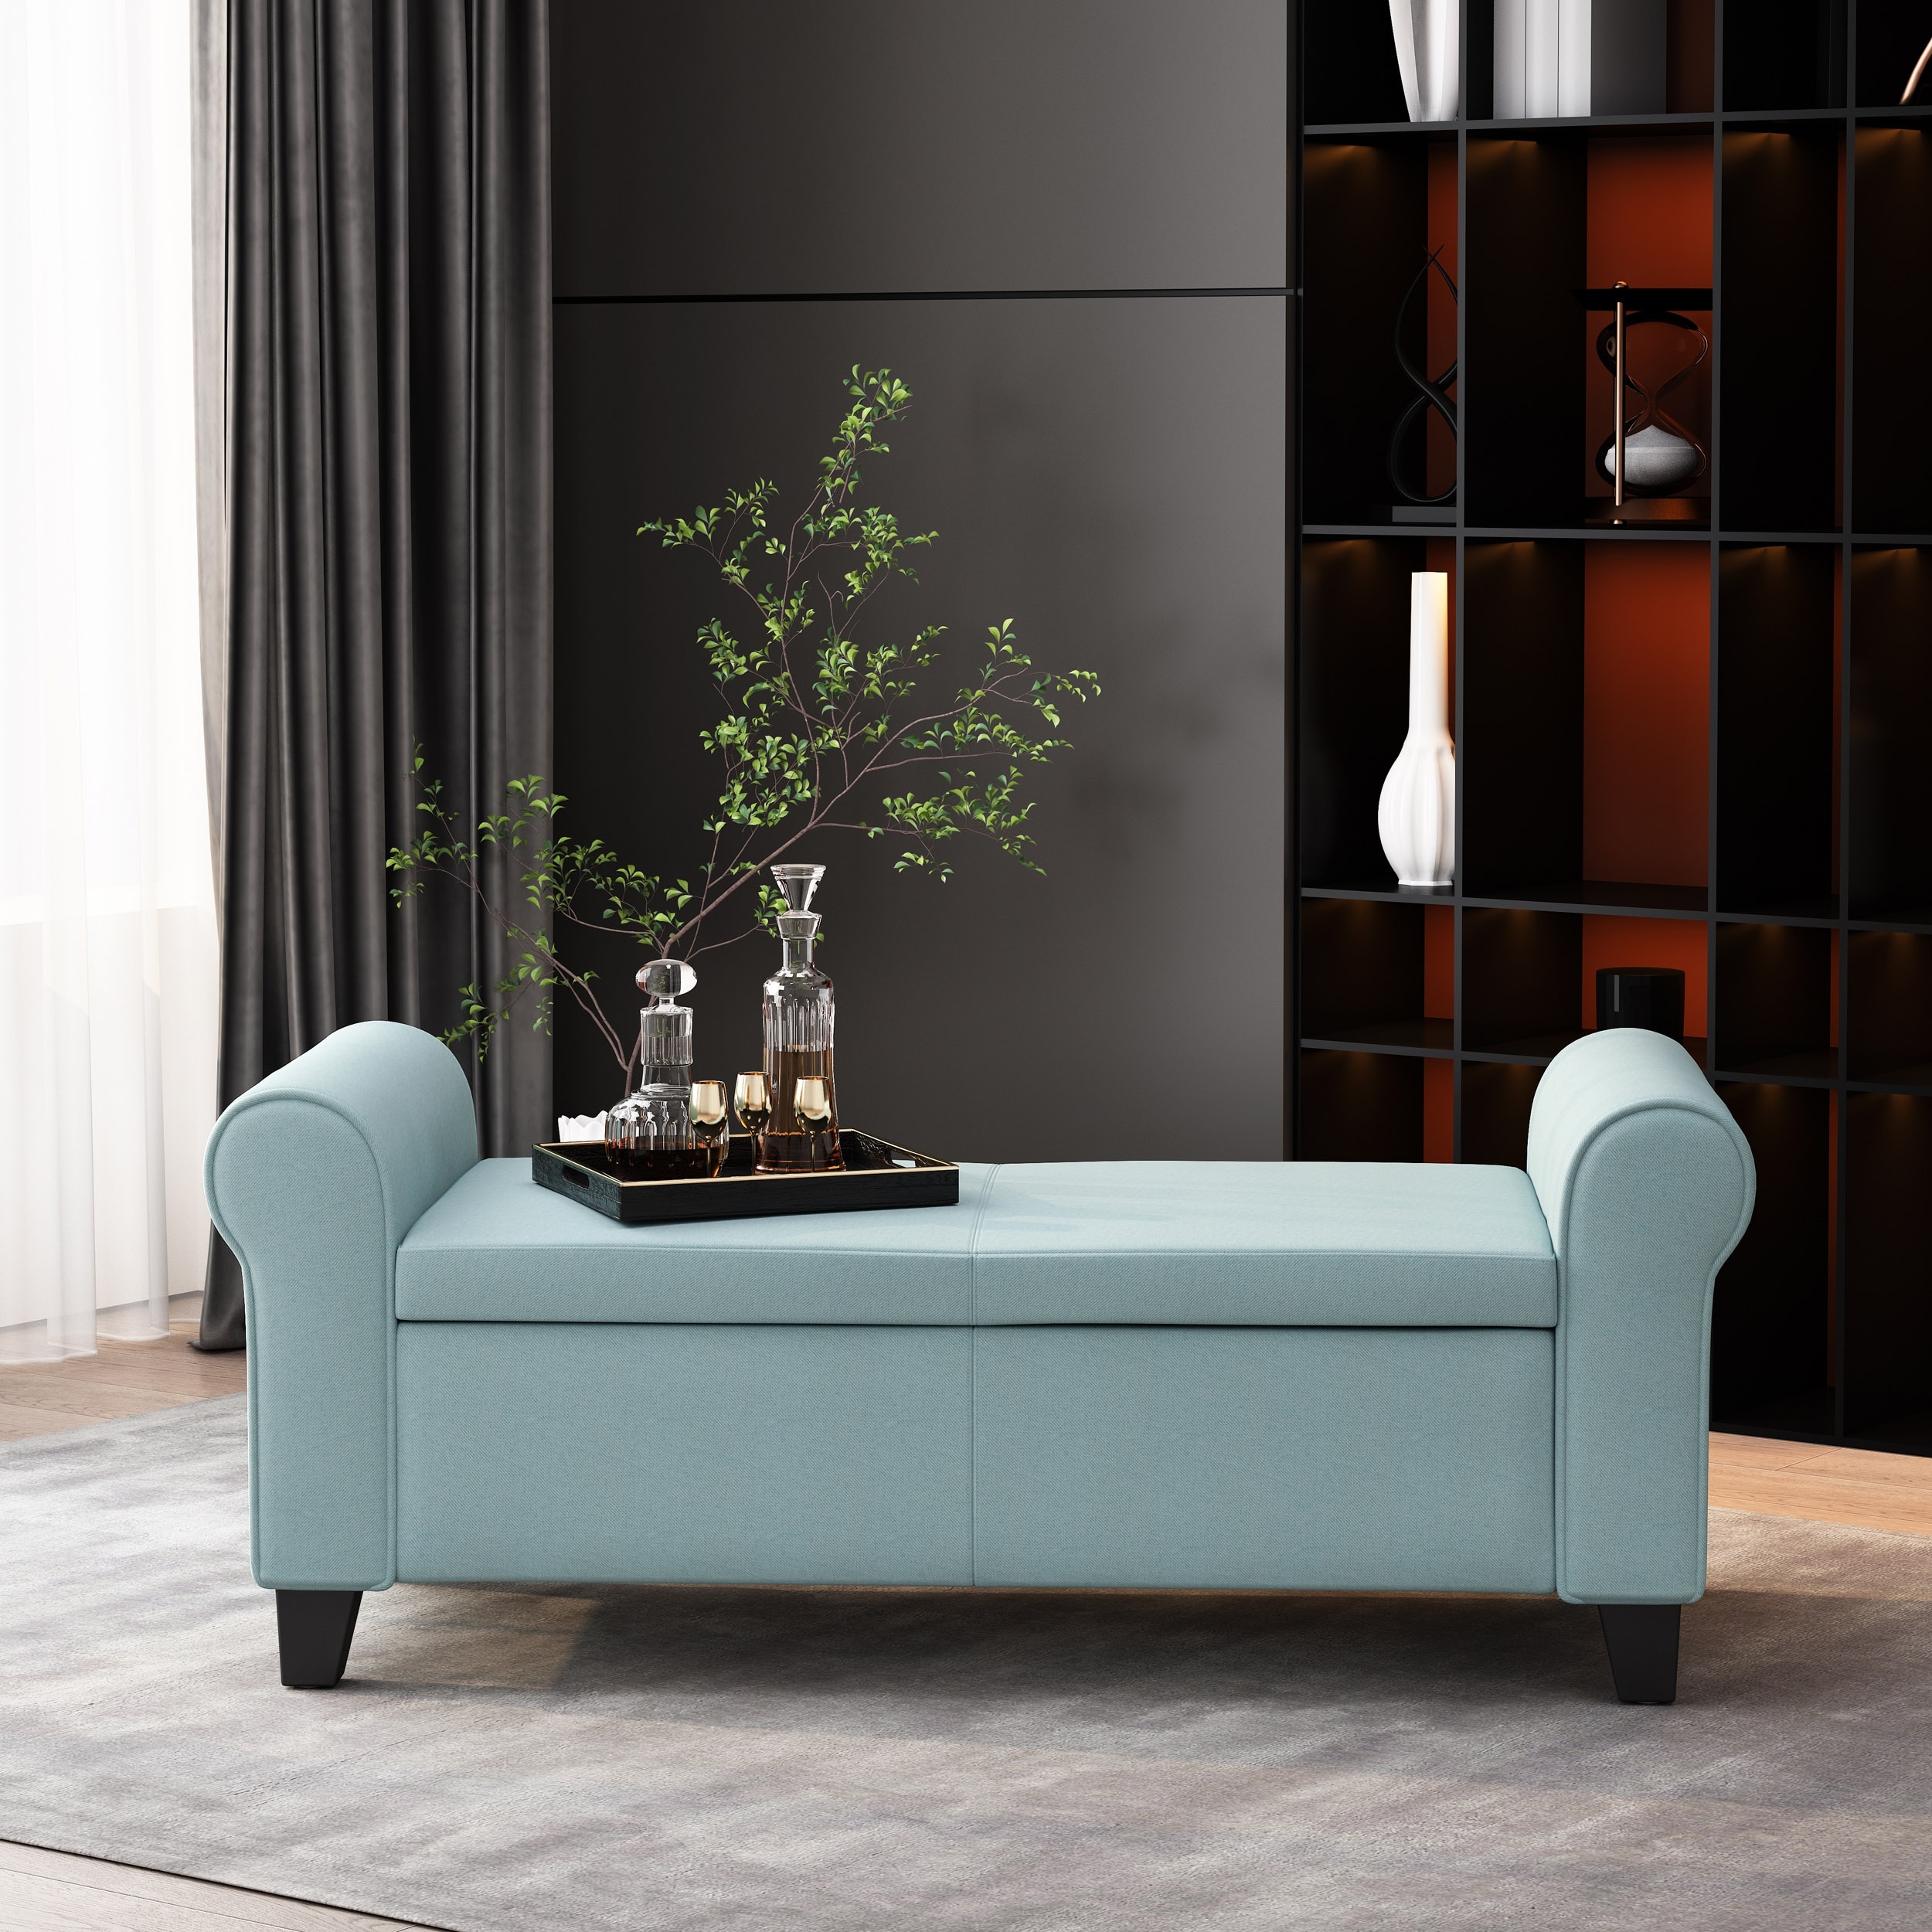 https://ak1.ostkcdn.com/images/products/is/images/direct/f78b11b34e5ea6c5814091fd7c5ce38a96d42e7f/Hayes-Contemporary-Fabric-Upholstered-Storage-Ottoman-Bench-with-Rolled-Arms-by-Christopher-Knight-Home.jpg